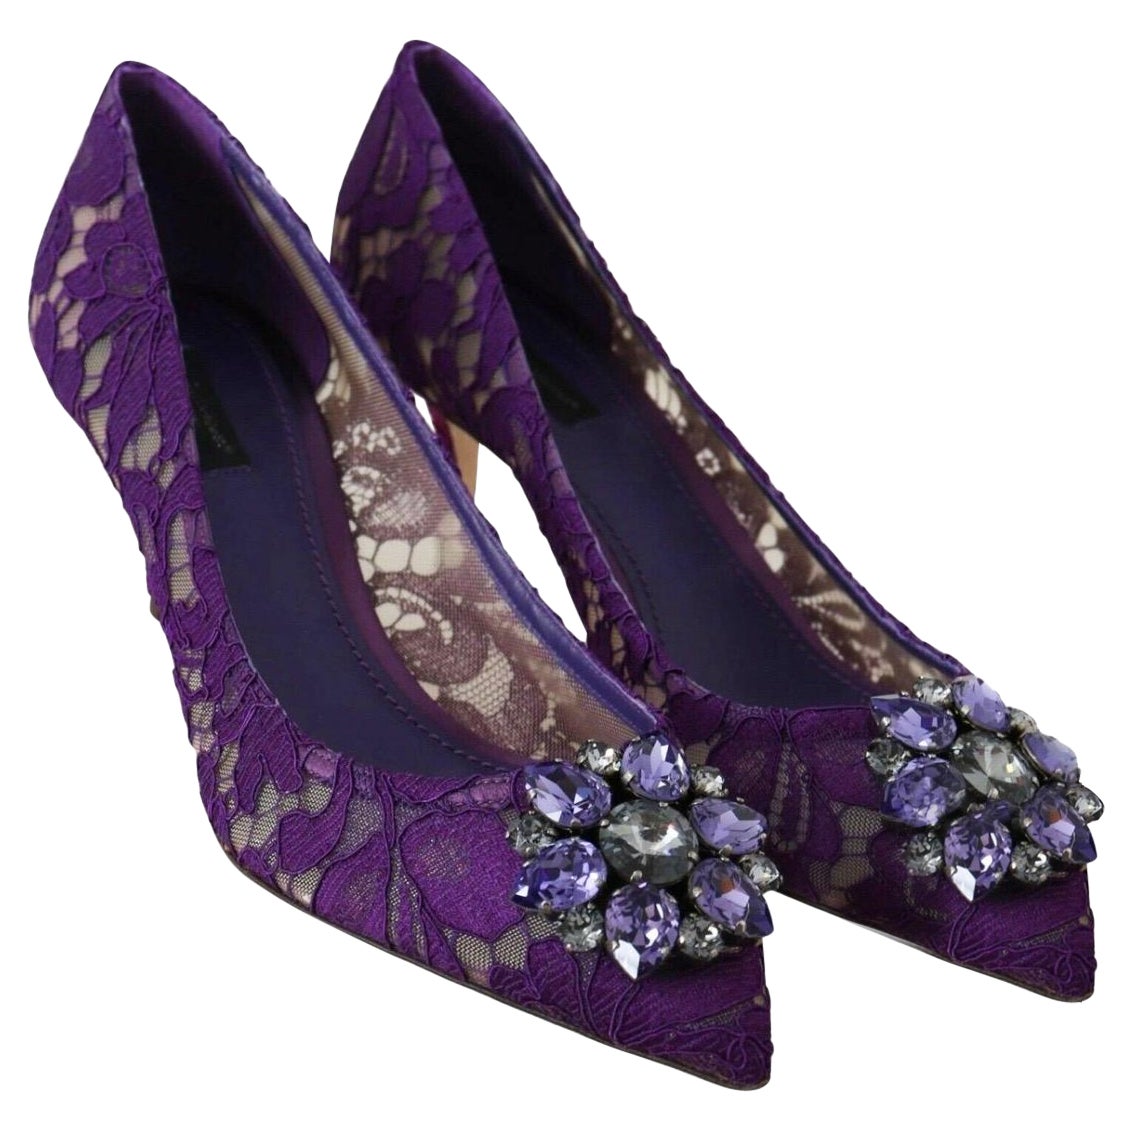 Dolce & Gabbana purple PUMP lace
shoes with jewel detail on the top heels  For Sale